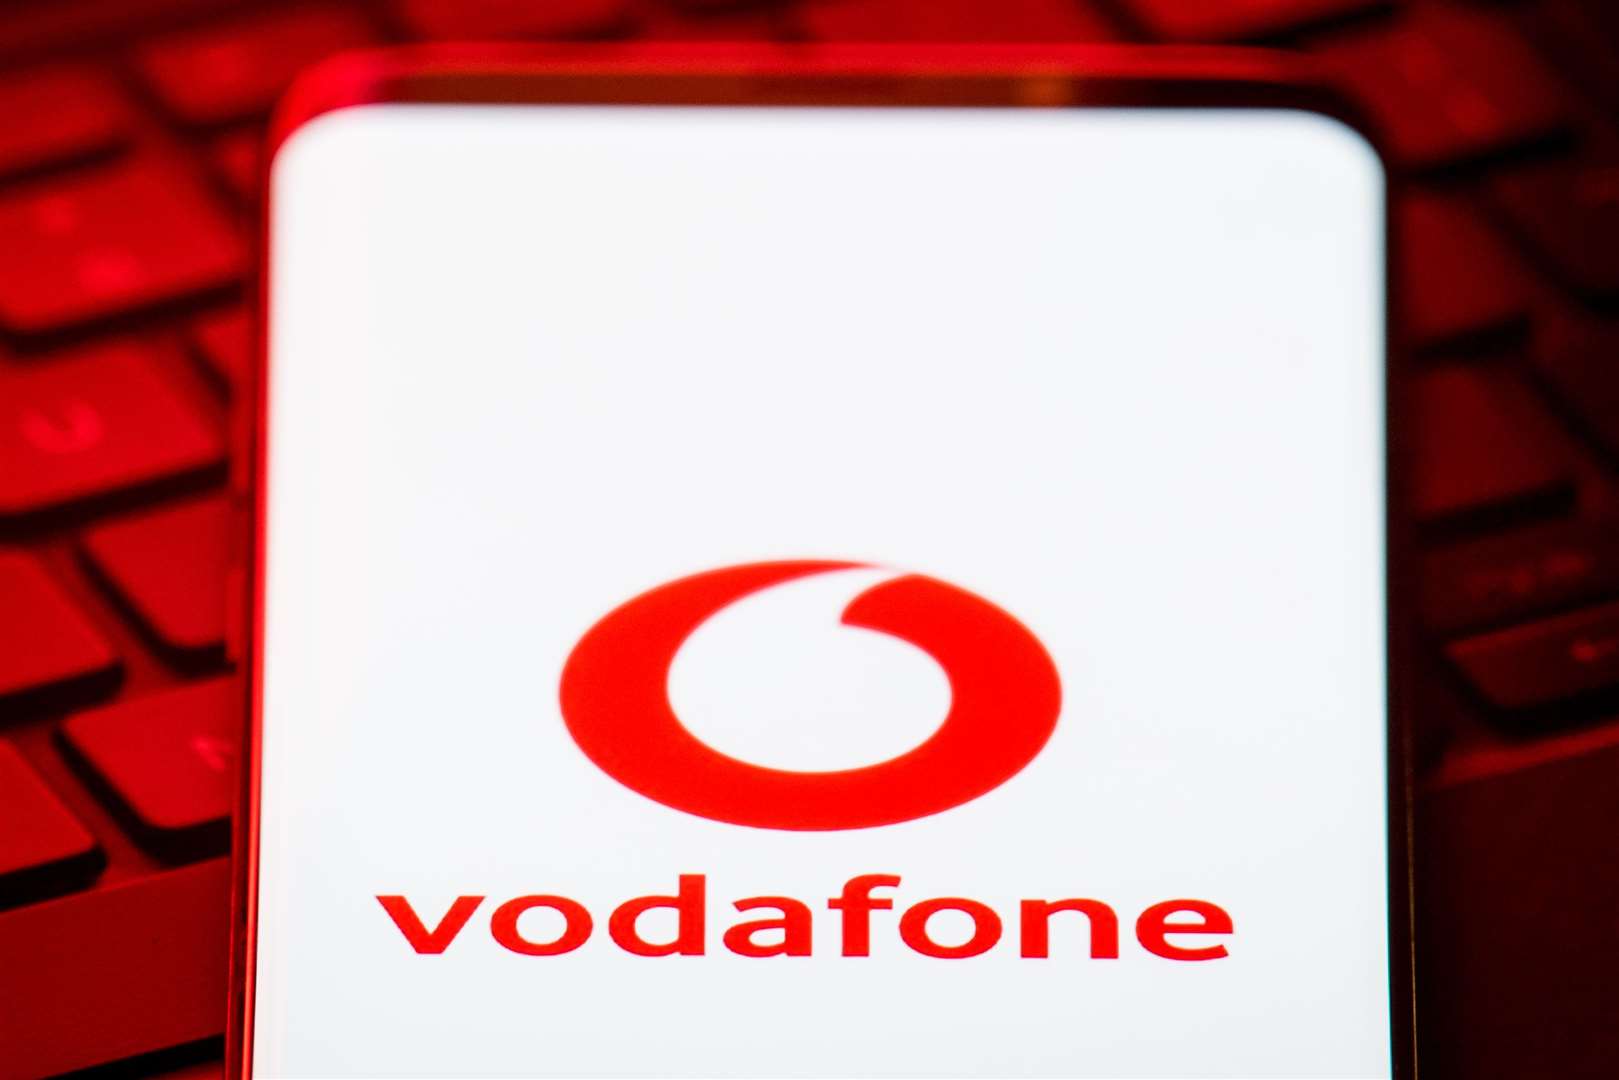 The logo of mobile phone network Vodafone is displayed (Dominic Lipinski/PA)